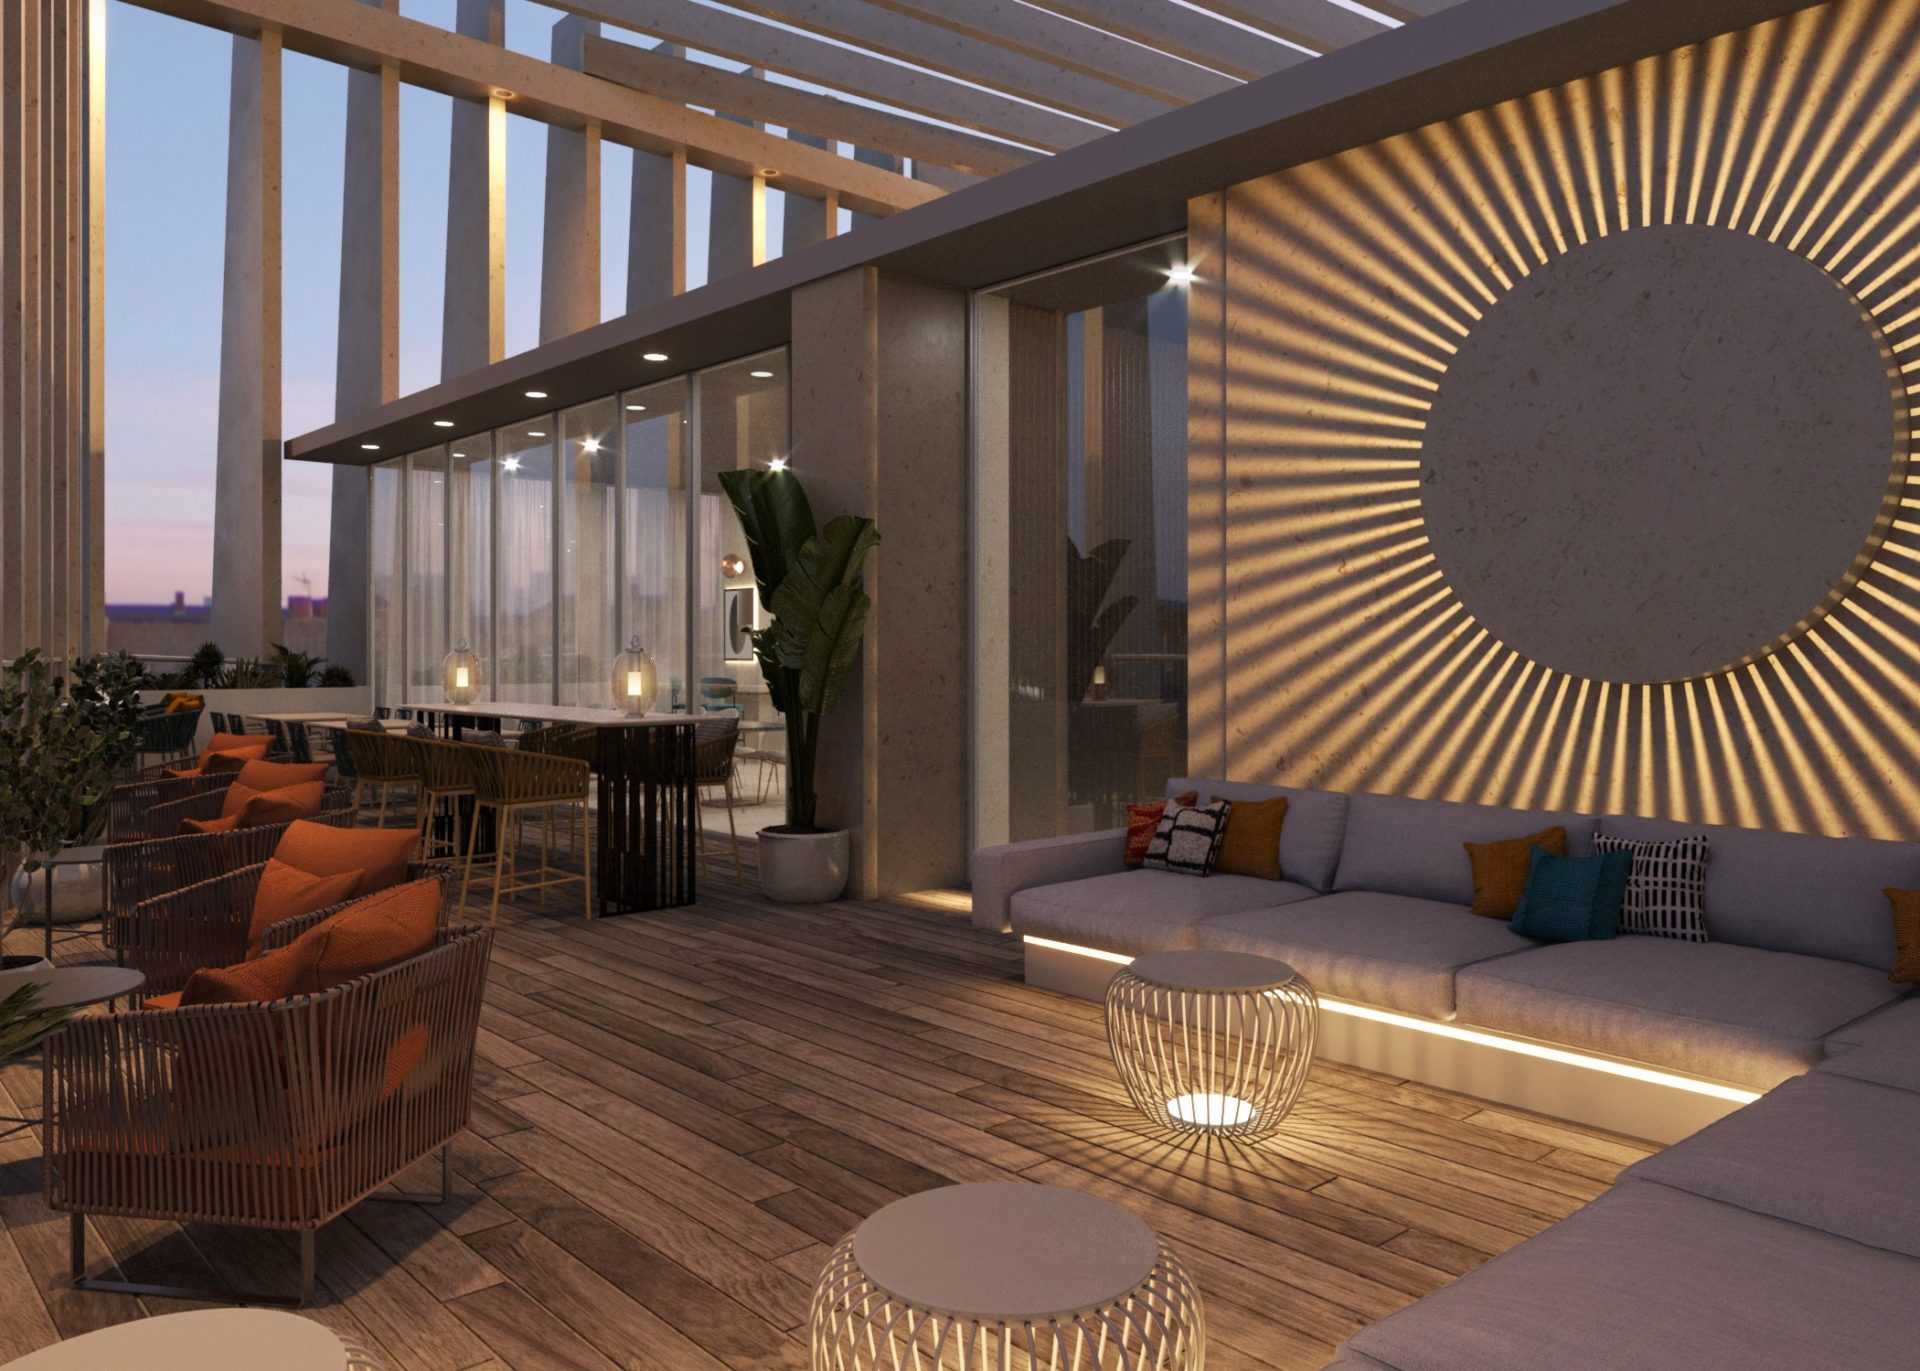 Tribe hotel Malta roof terrace with relaxed seating and graphic lighting details